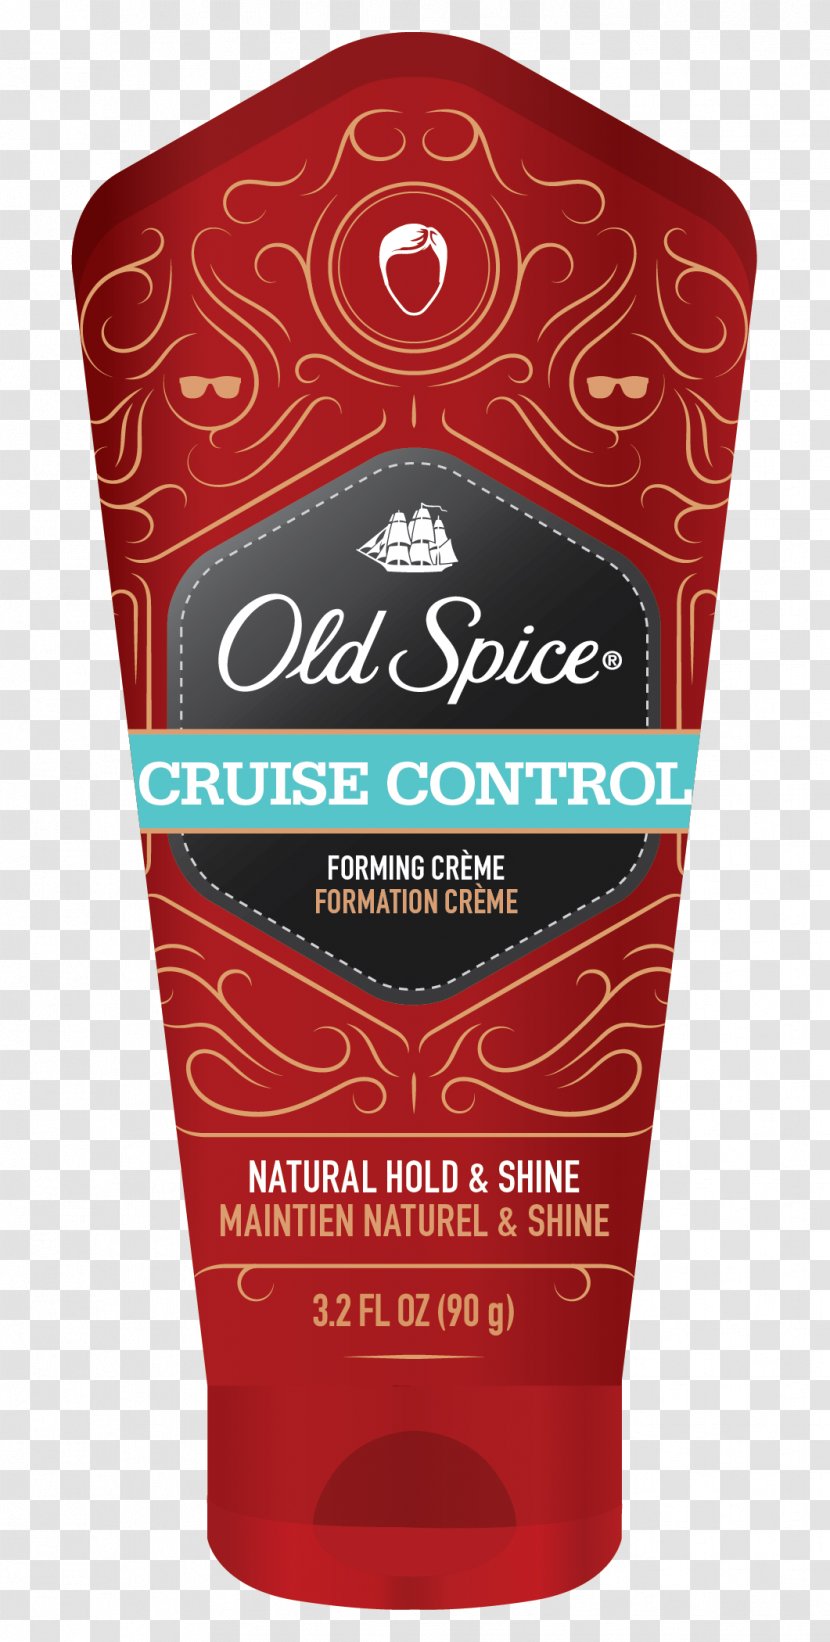 Old Spice Hair Care Procter & Gamble Spiffy Pomade - Shower Gel Transparent PNG